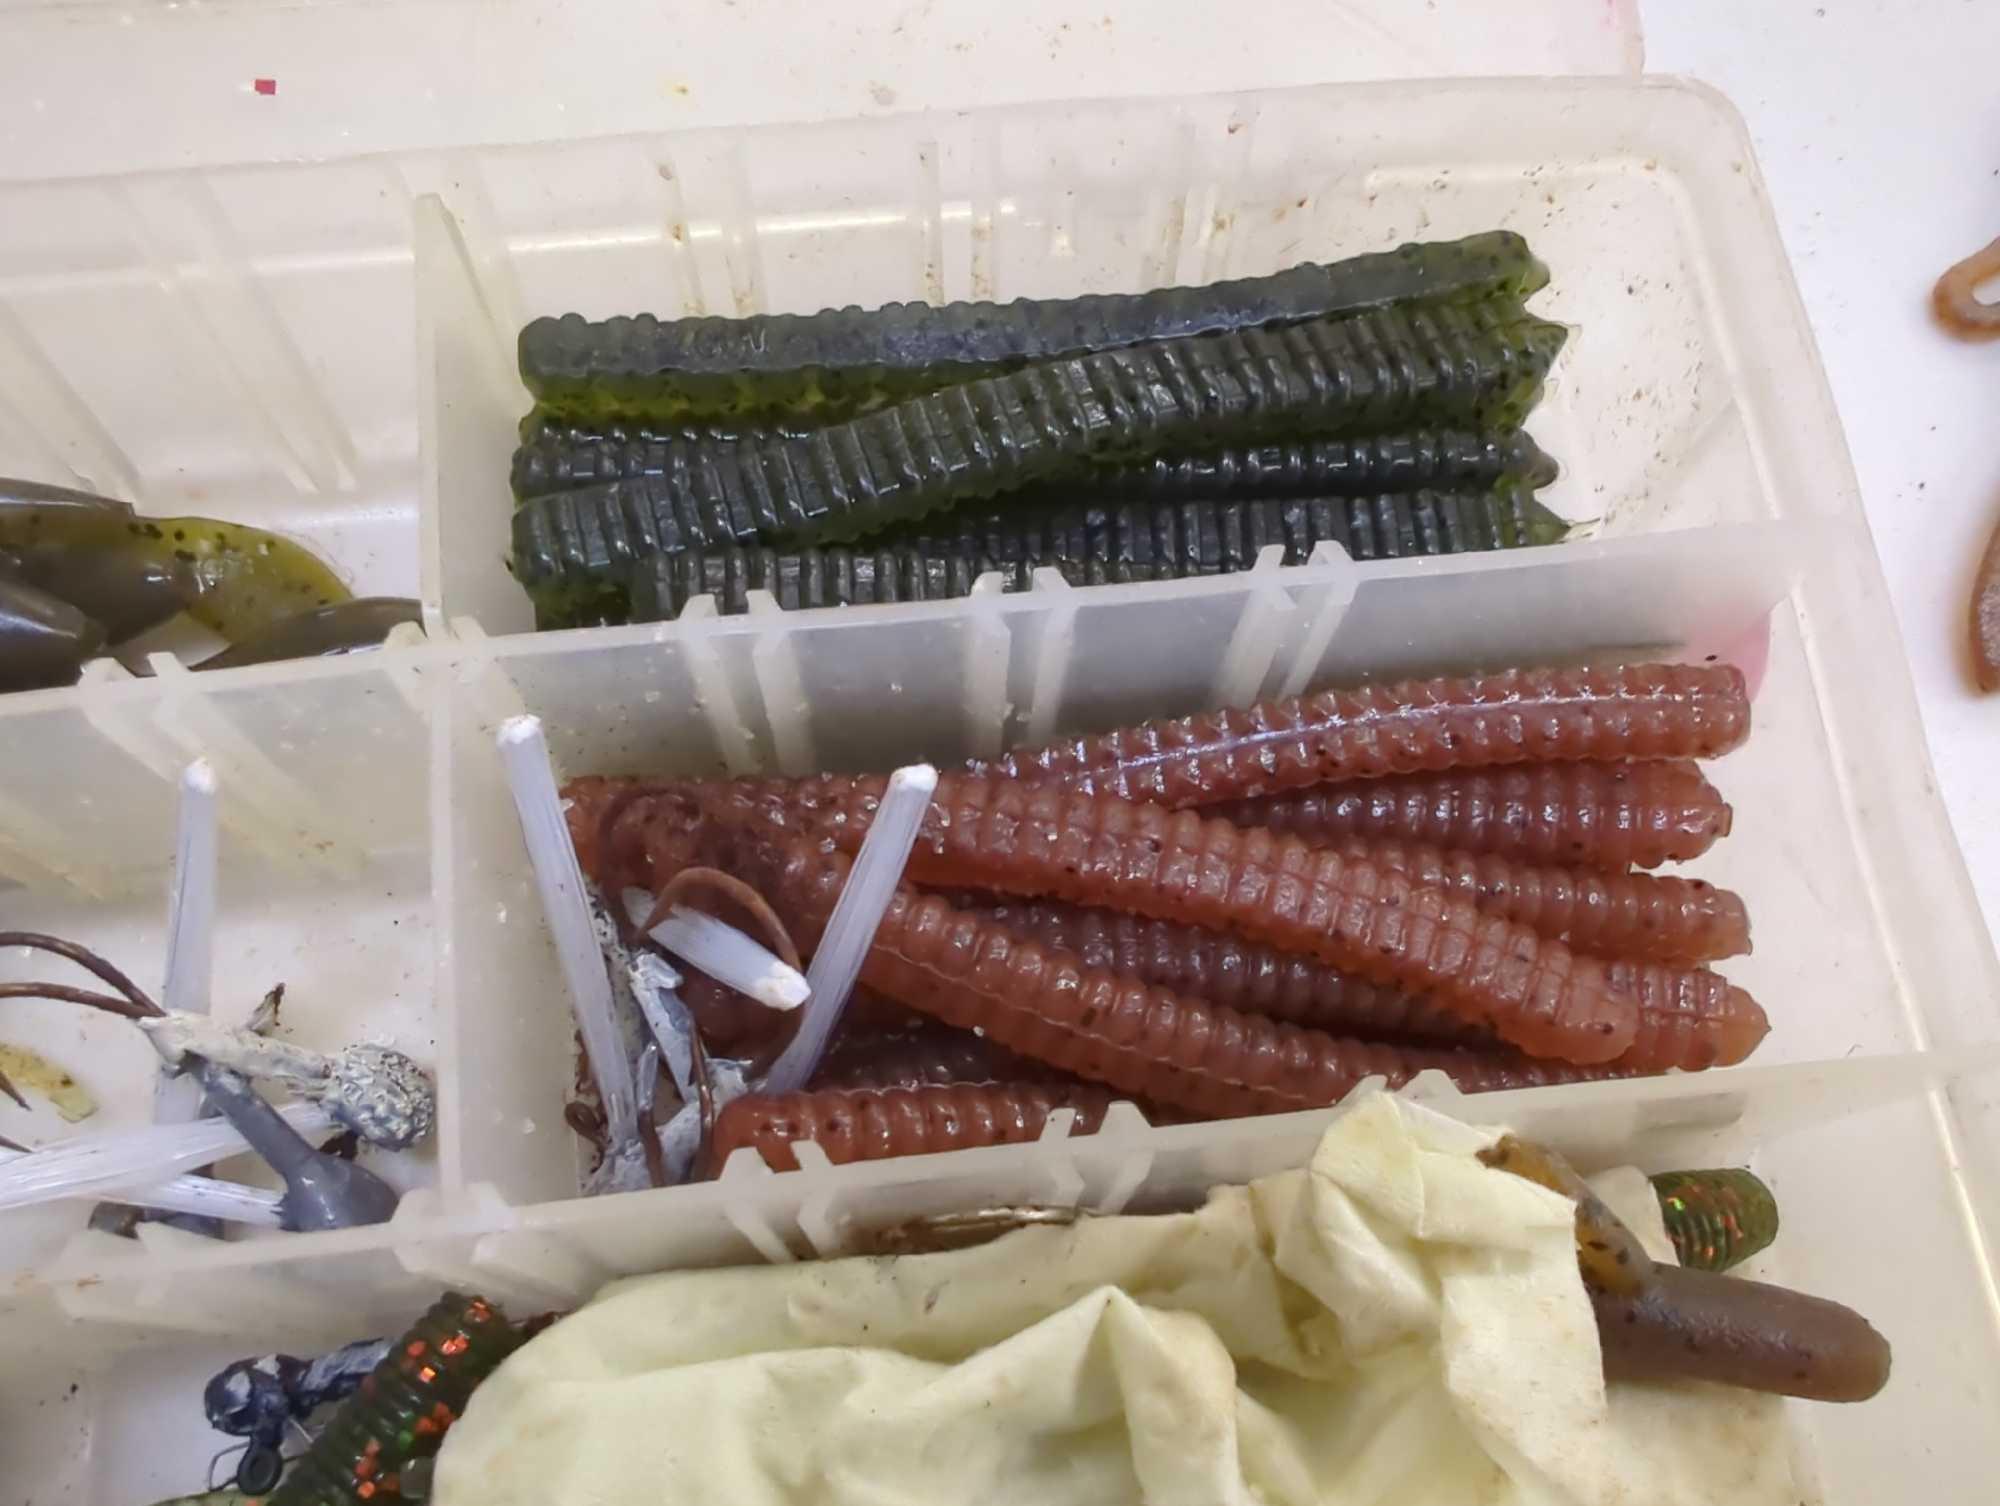 Tackle Box and contents including various worm fishing lures. Comes as is shown in photos. Appears